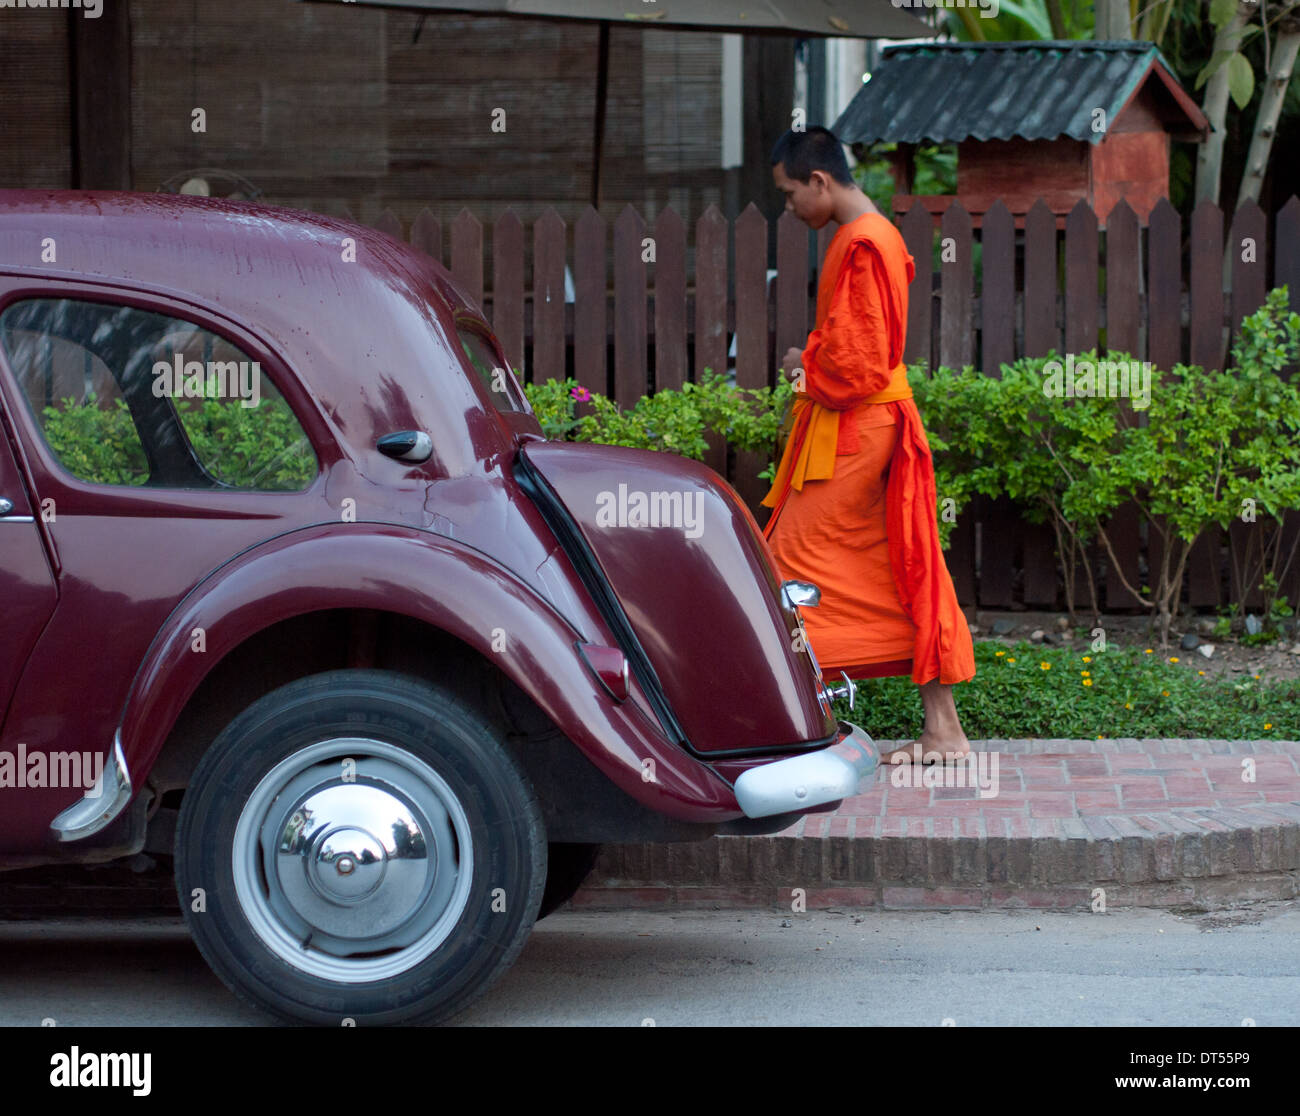 A Buddhist monk walks past an antique car during morning procession of alms in Luang Prabang, Laos. Stock Photo